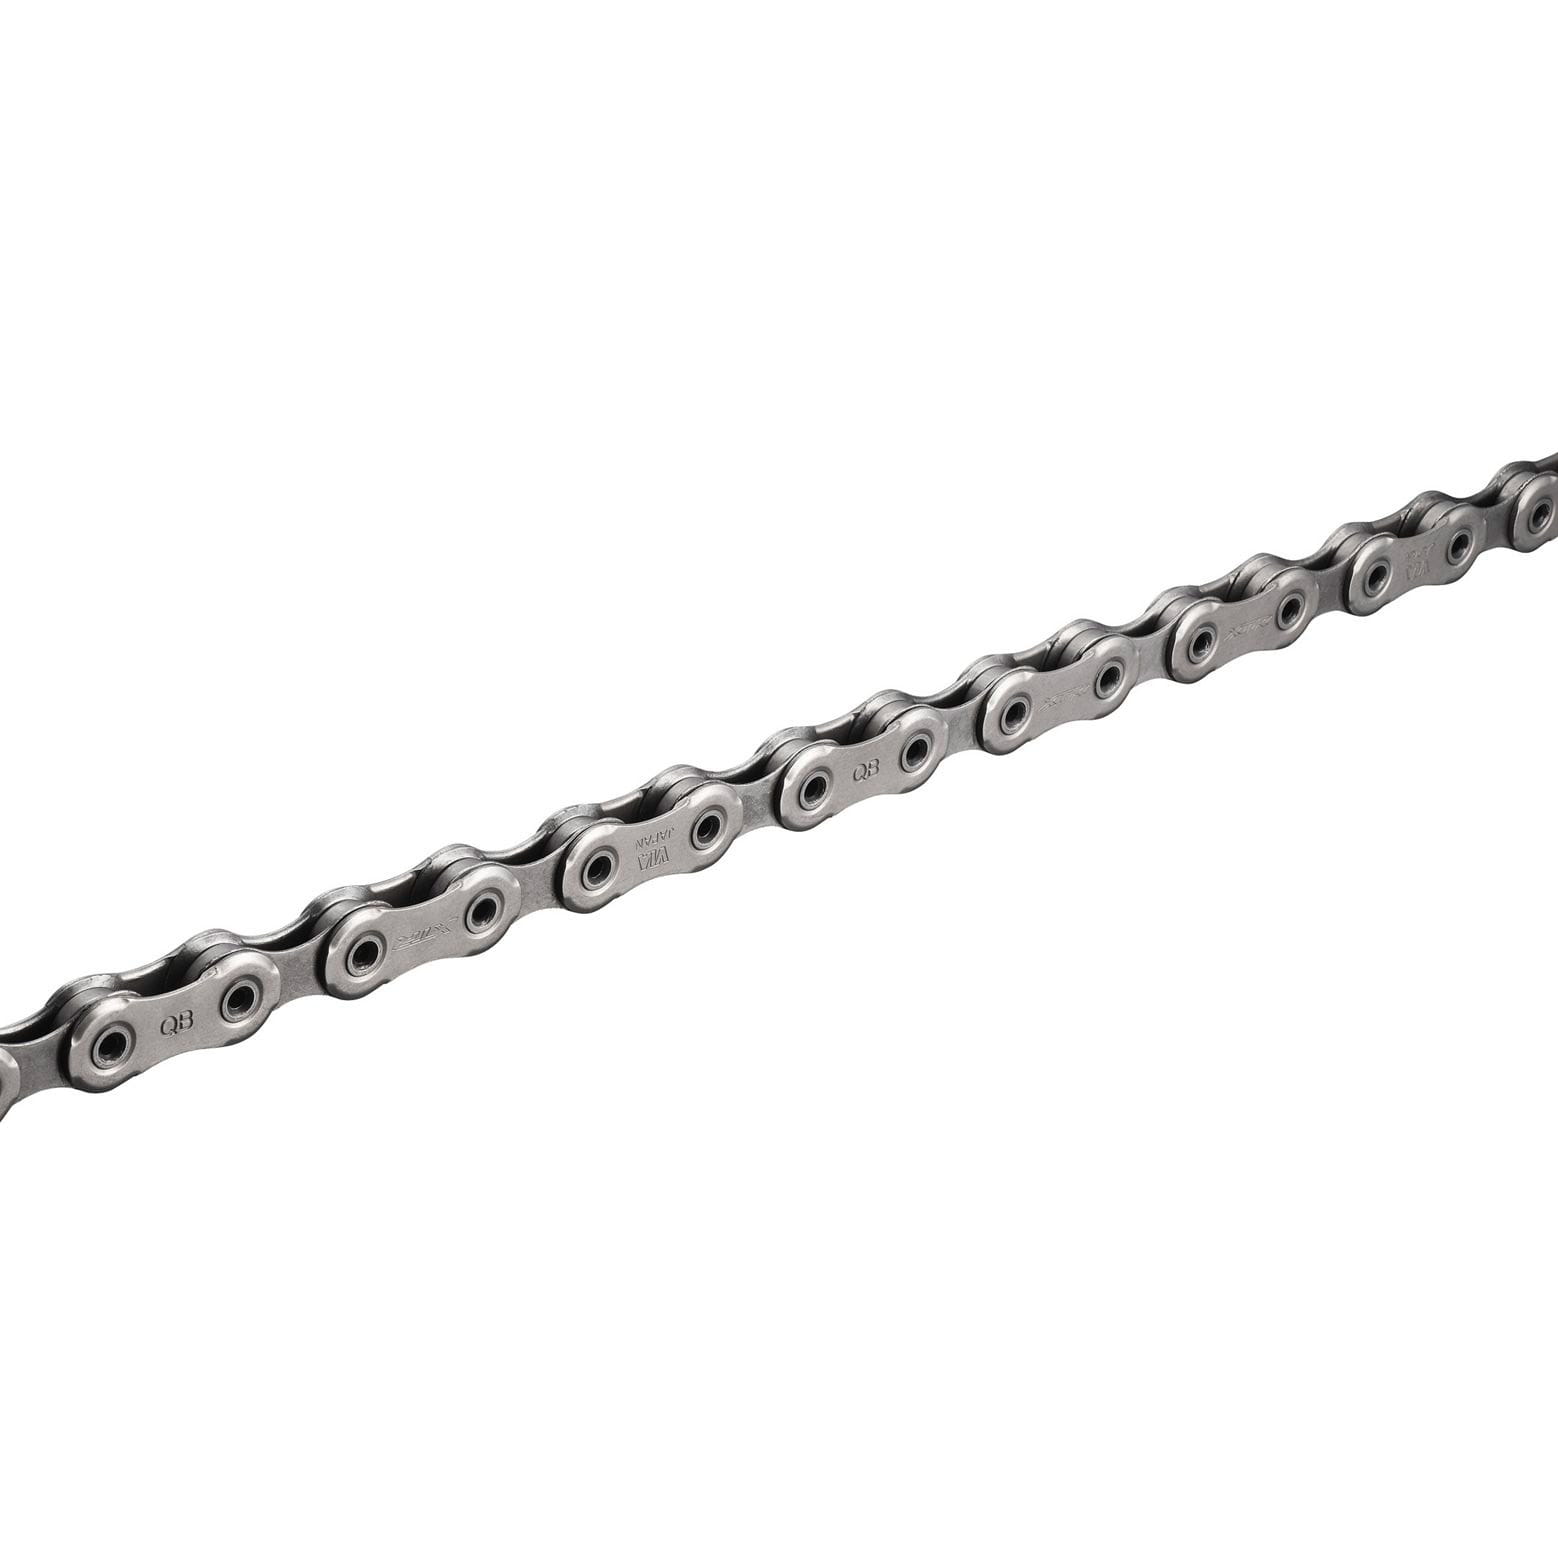 Shimano Chain CN-M9100 12-speed (XTR / E-Bike) with Quick-Link